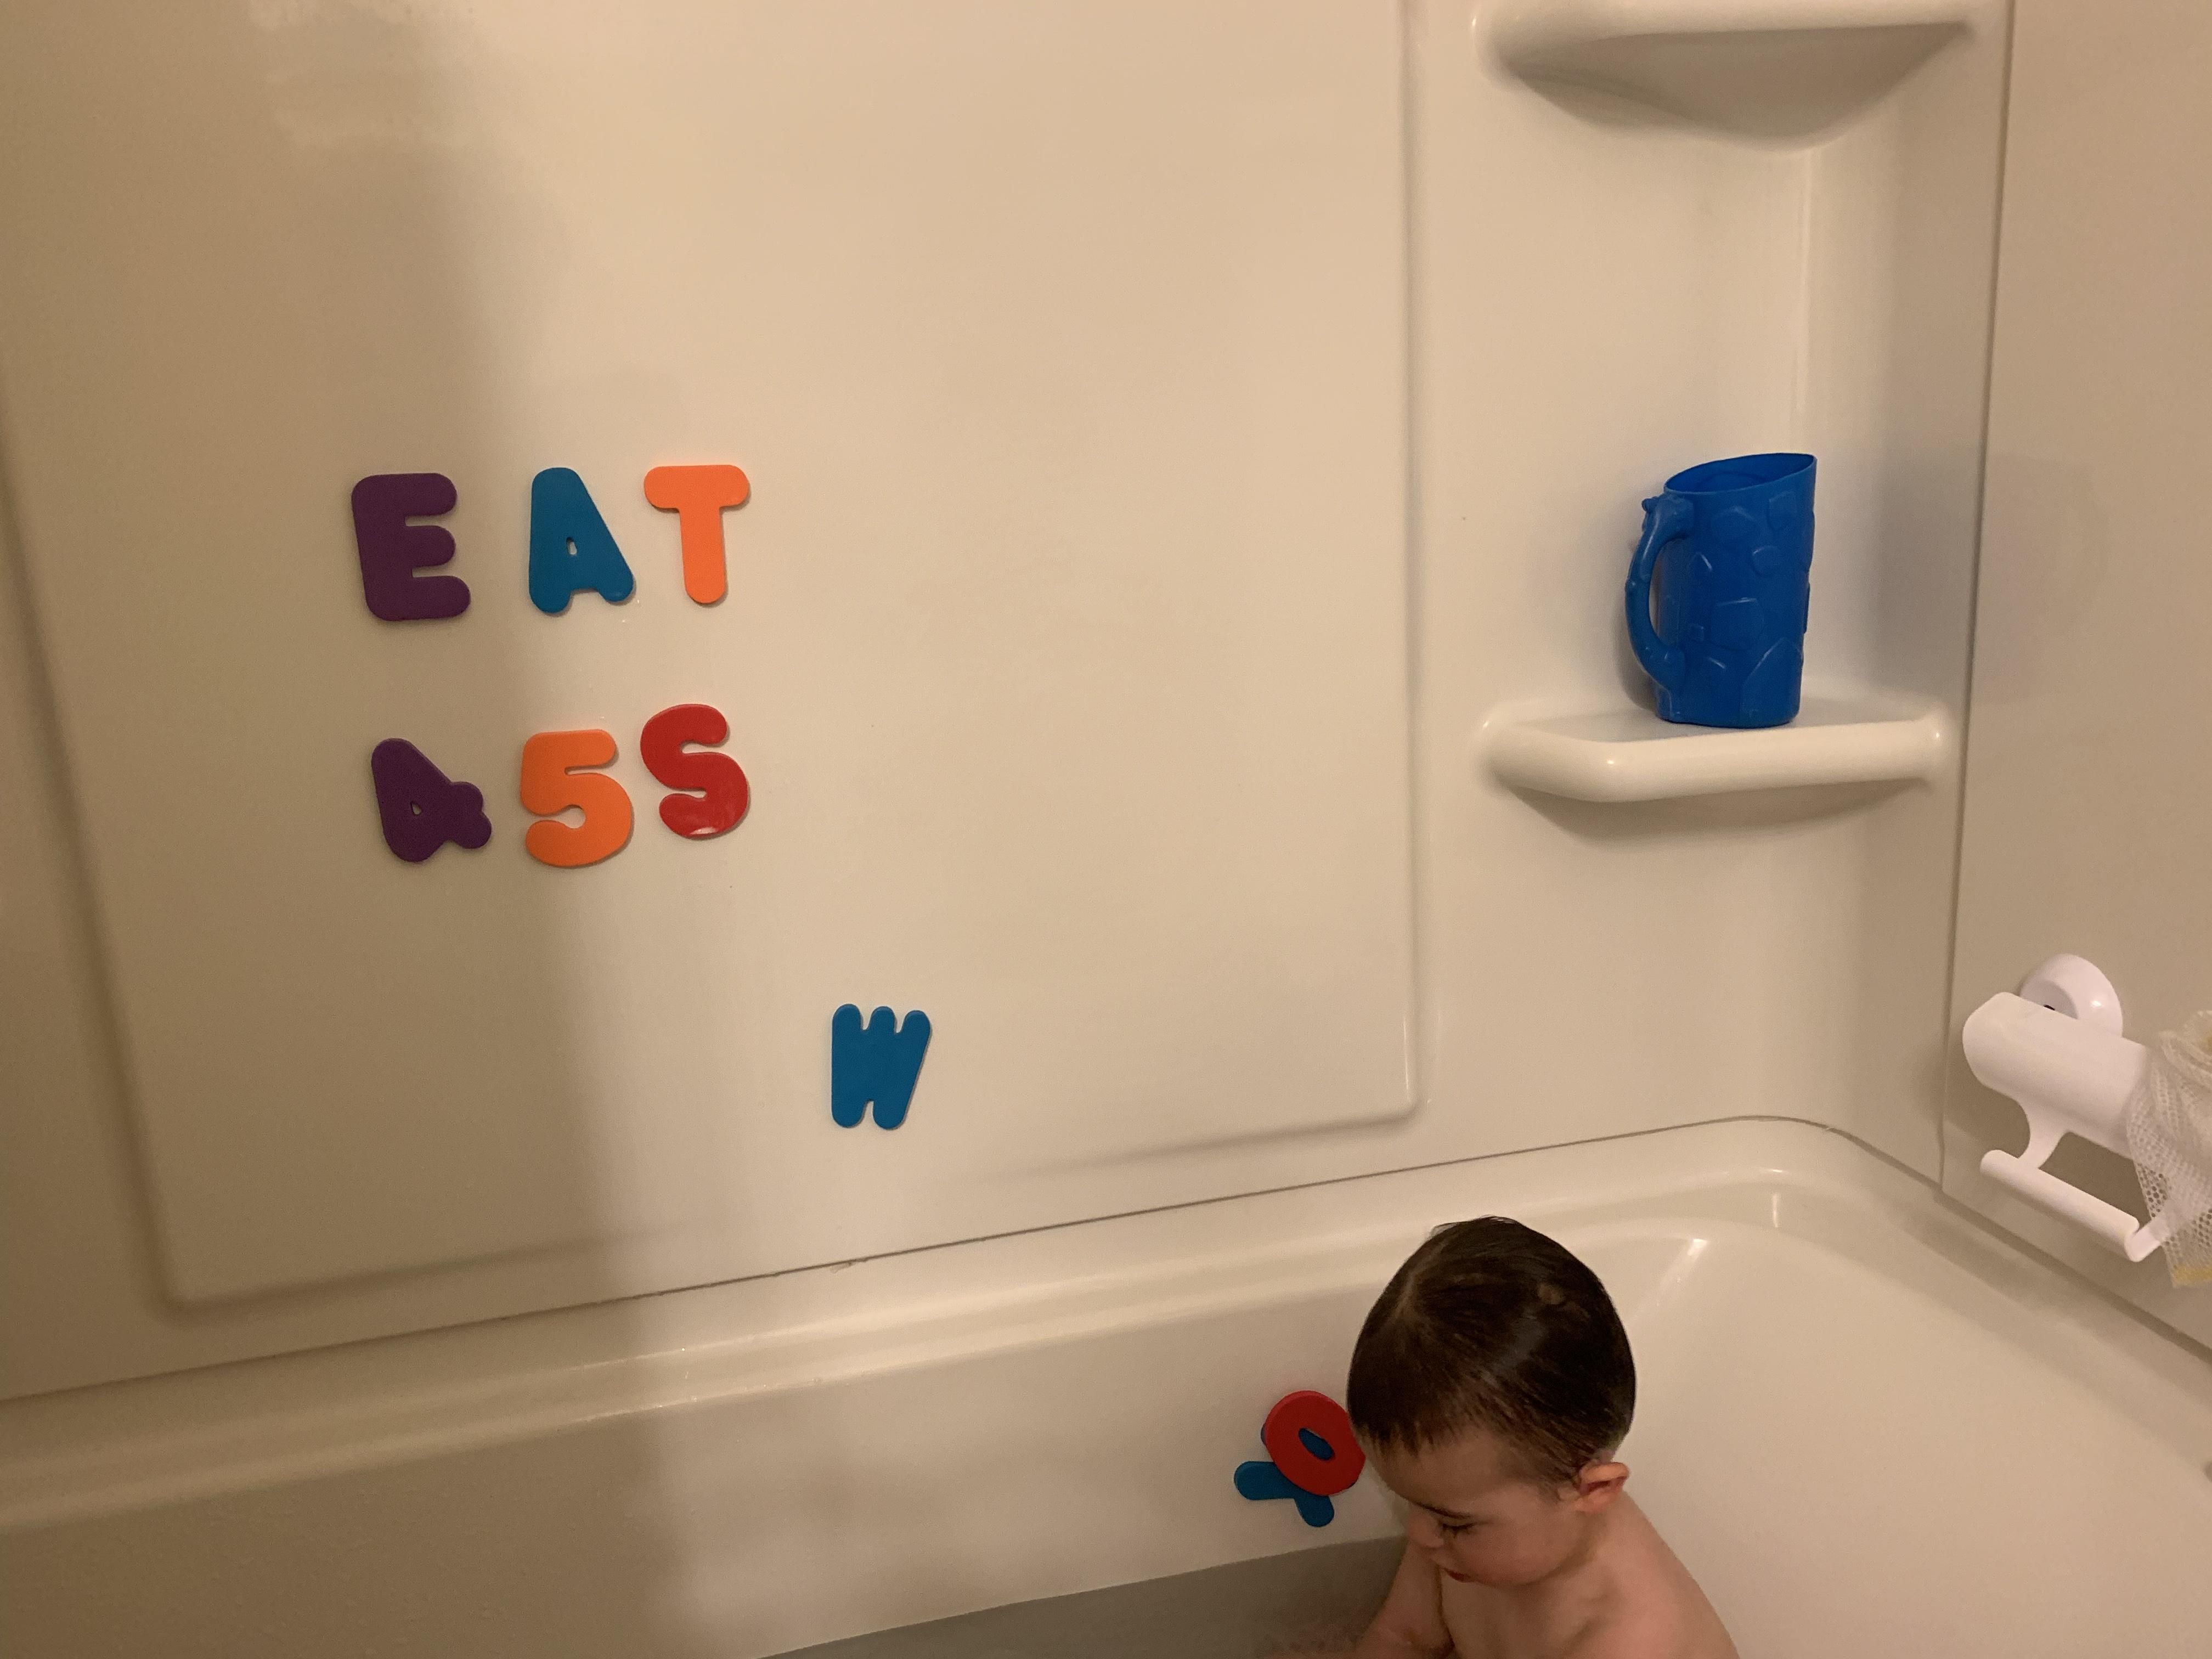 He can spell “eat”. The other part is coincidence.